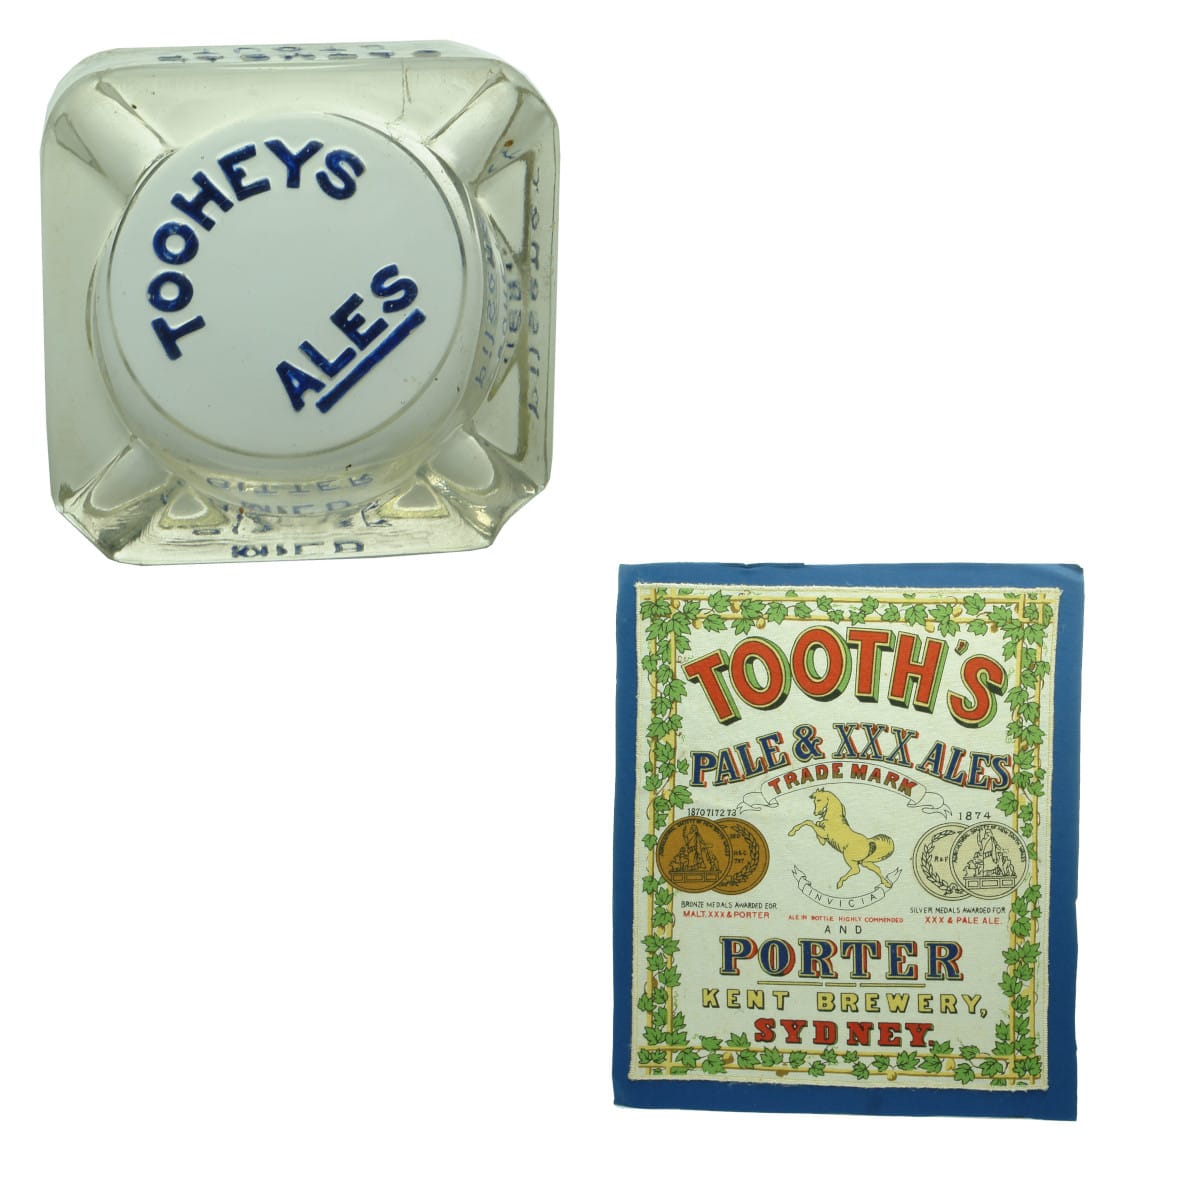 Two Beer Advertising pieces: Tooheys Ales glass Ashtray and woven advert for Tooth's Pale & XXX Ales. (New South Wales)